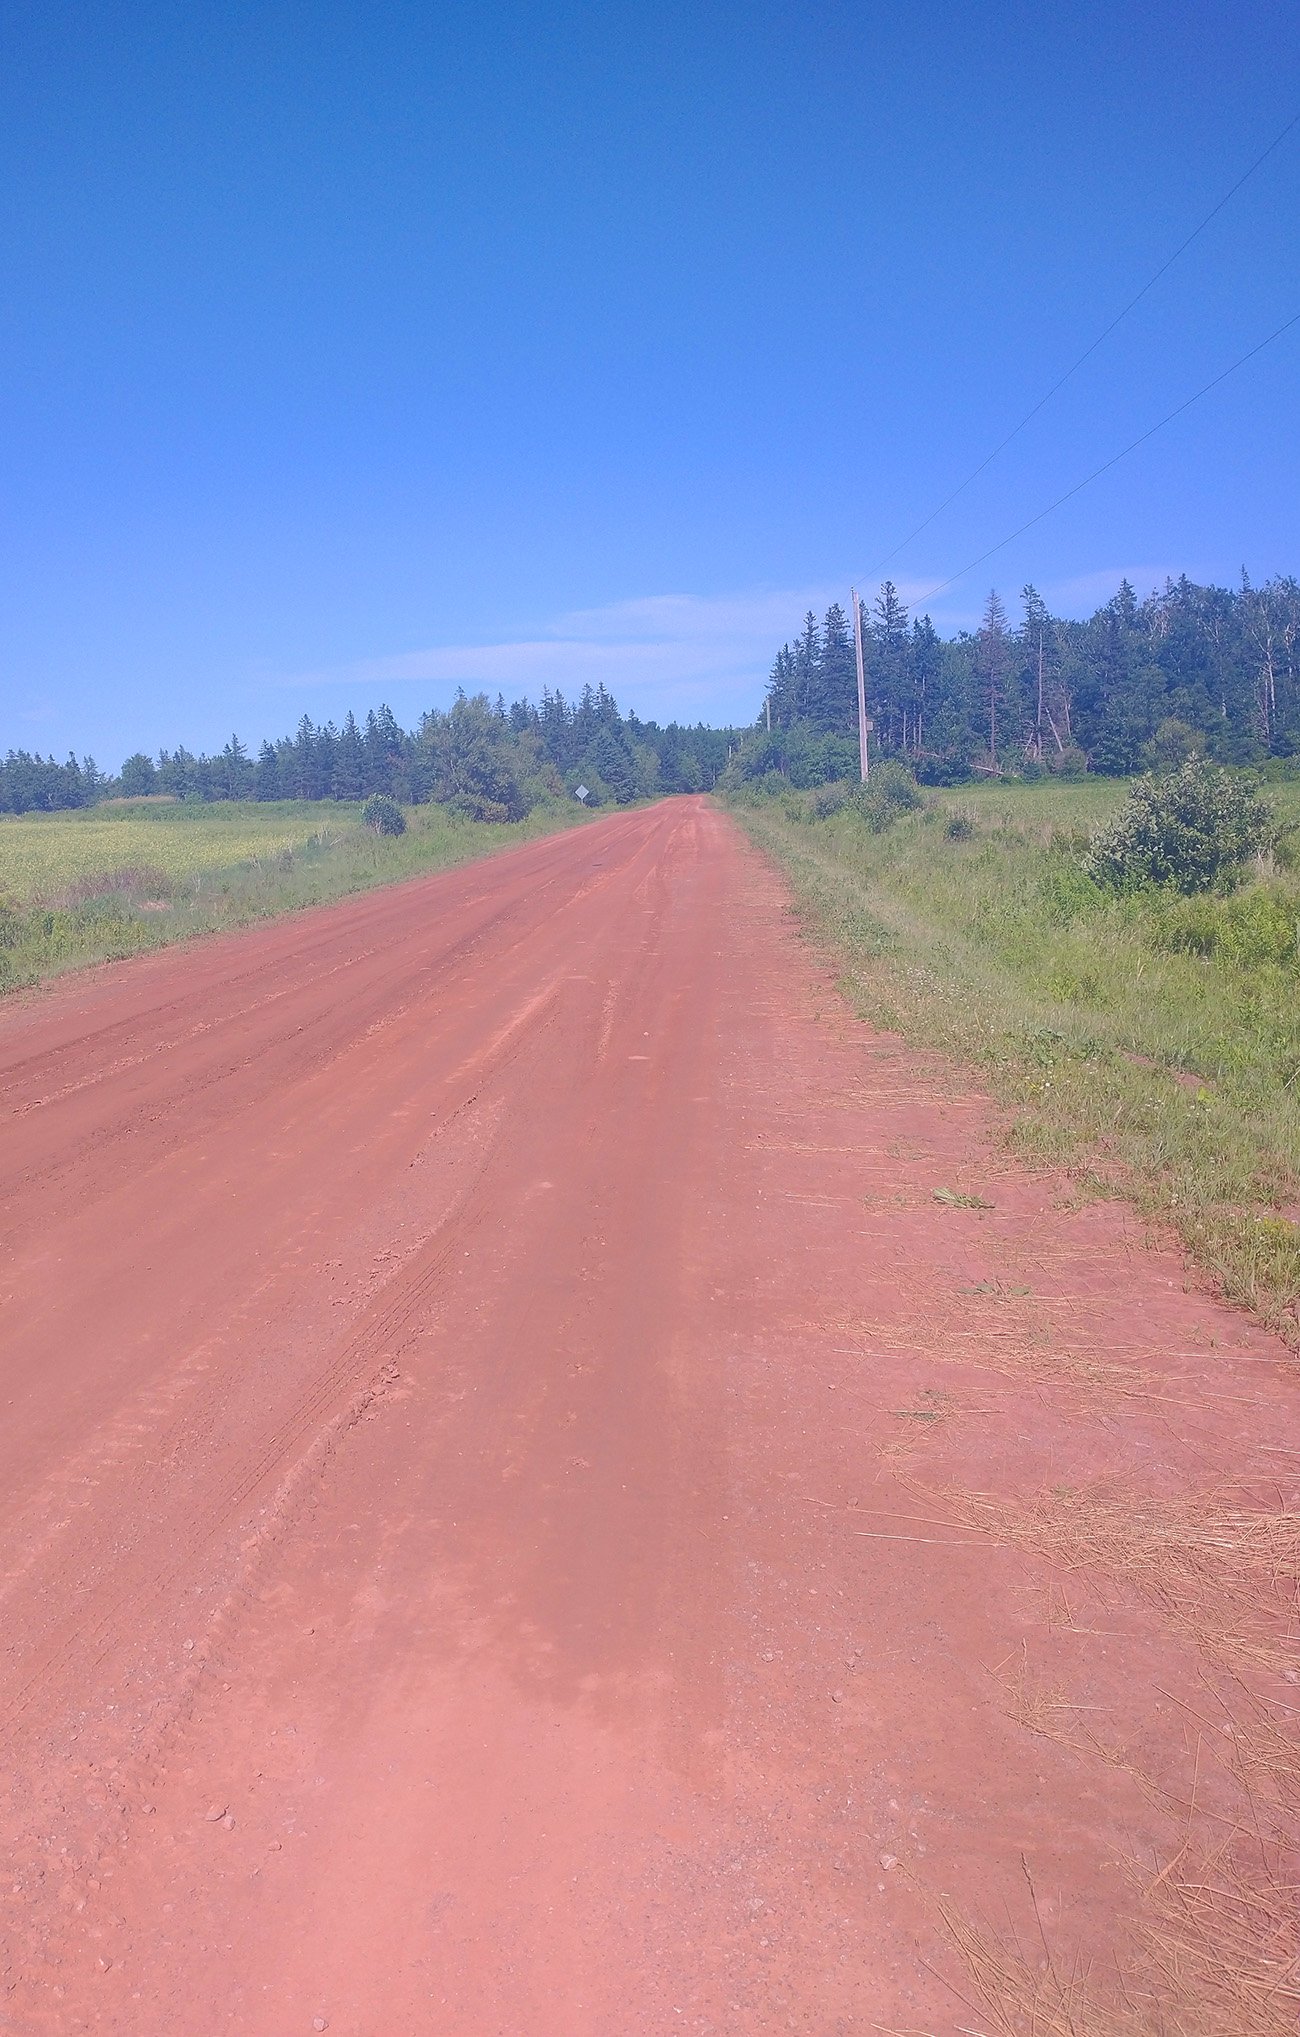 The dirt roads are all red. Even the patches to repair the paved roads use this red stuff.